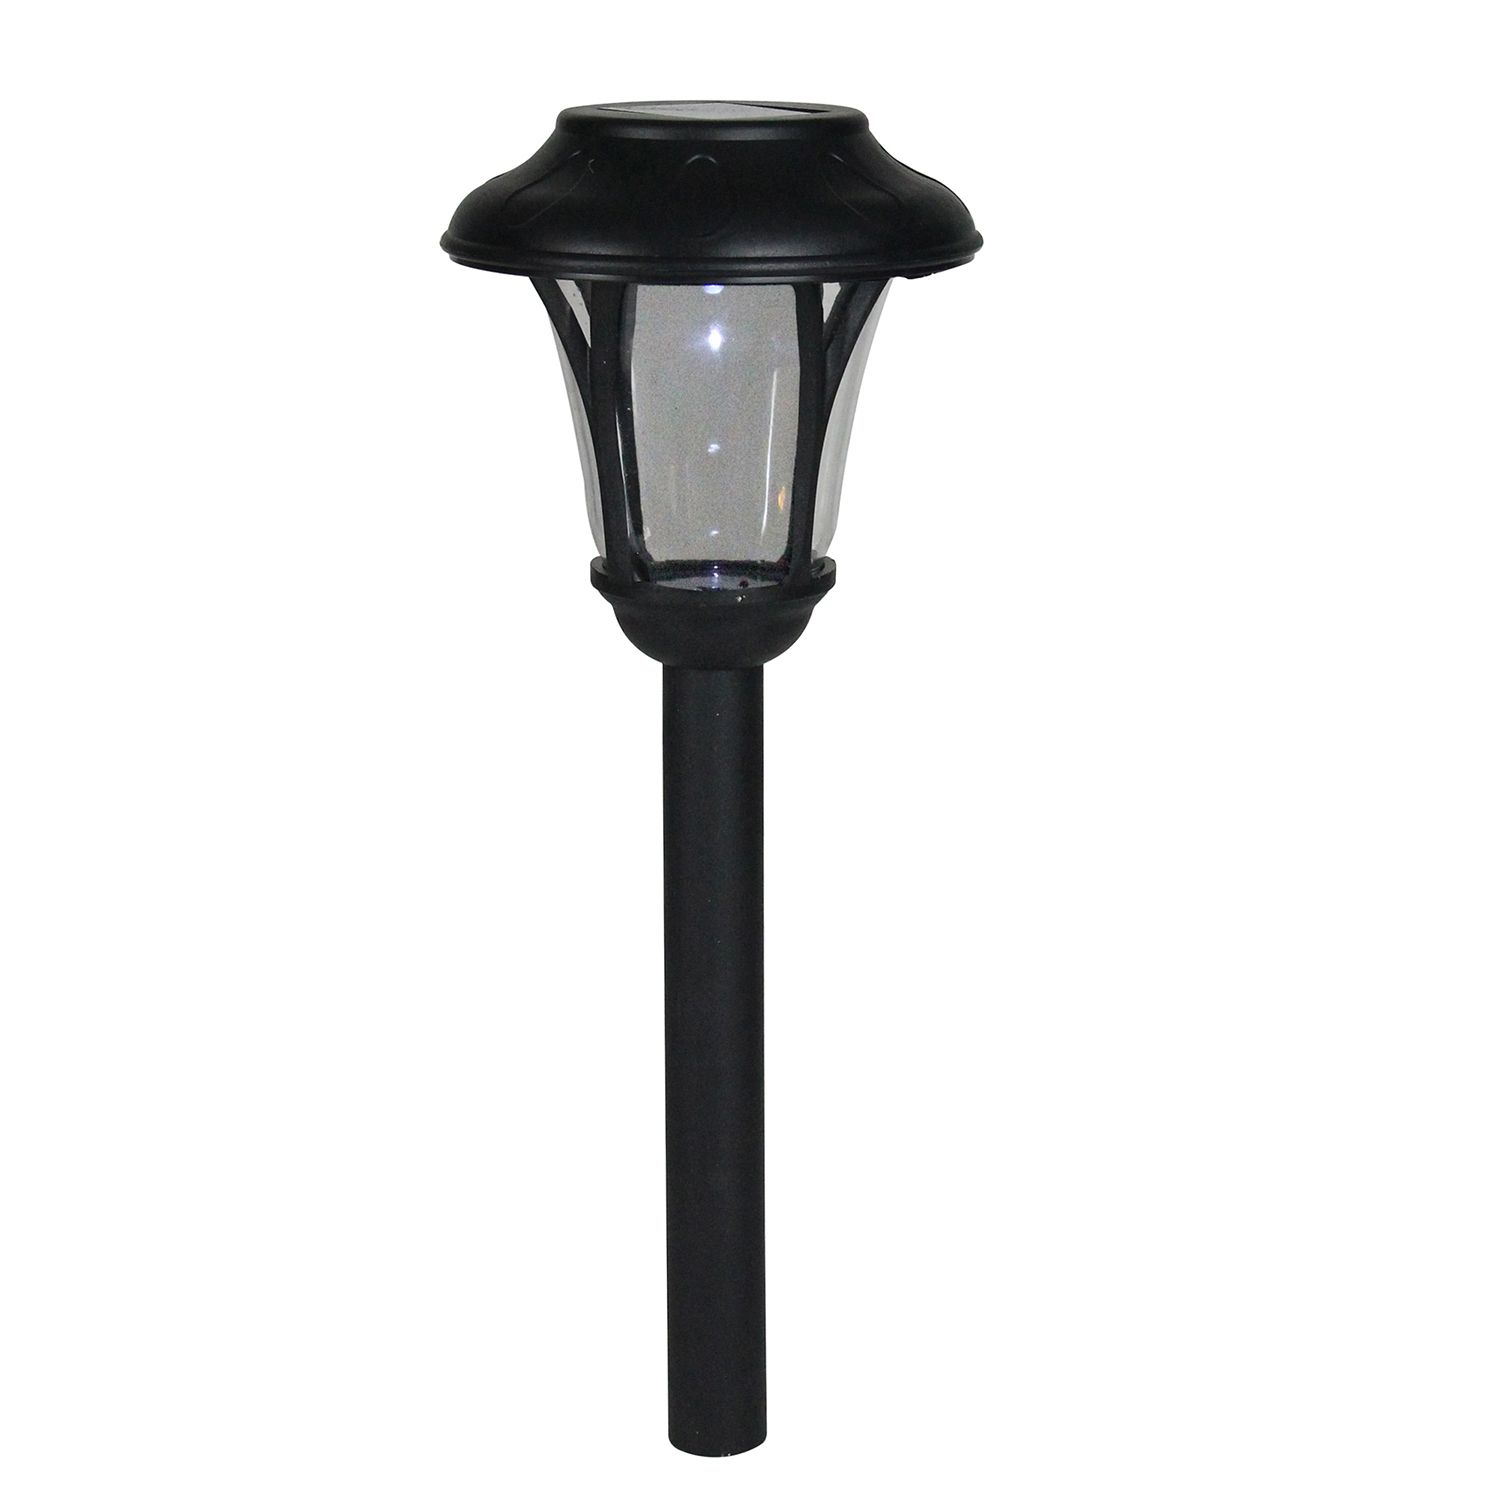 12 in. Black LED Lighted Battery Operated Lantern Warm White Flickering  Light